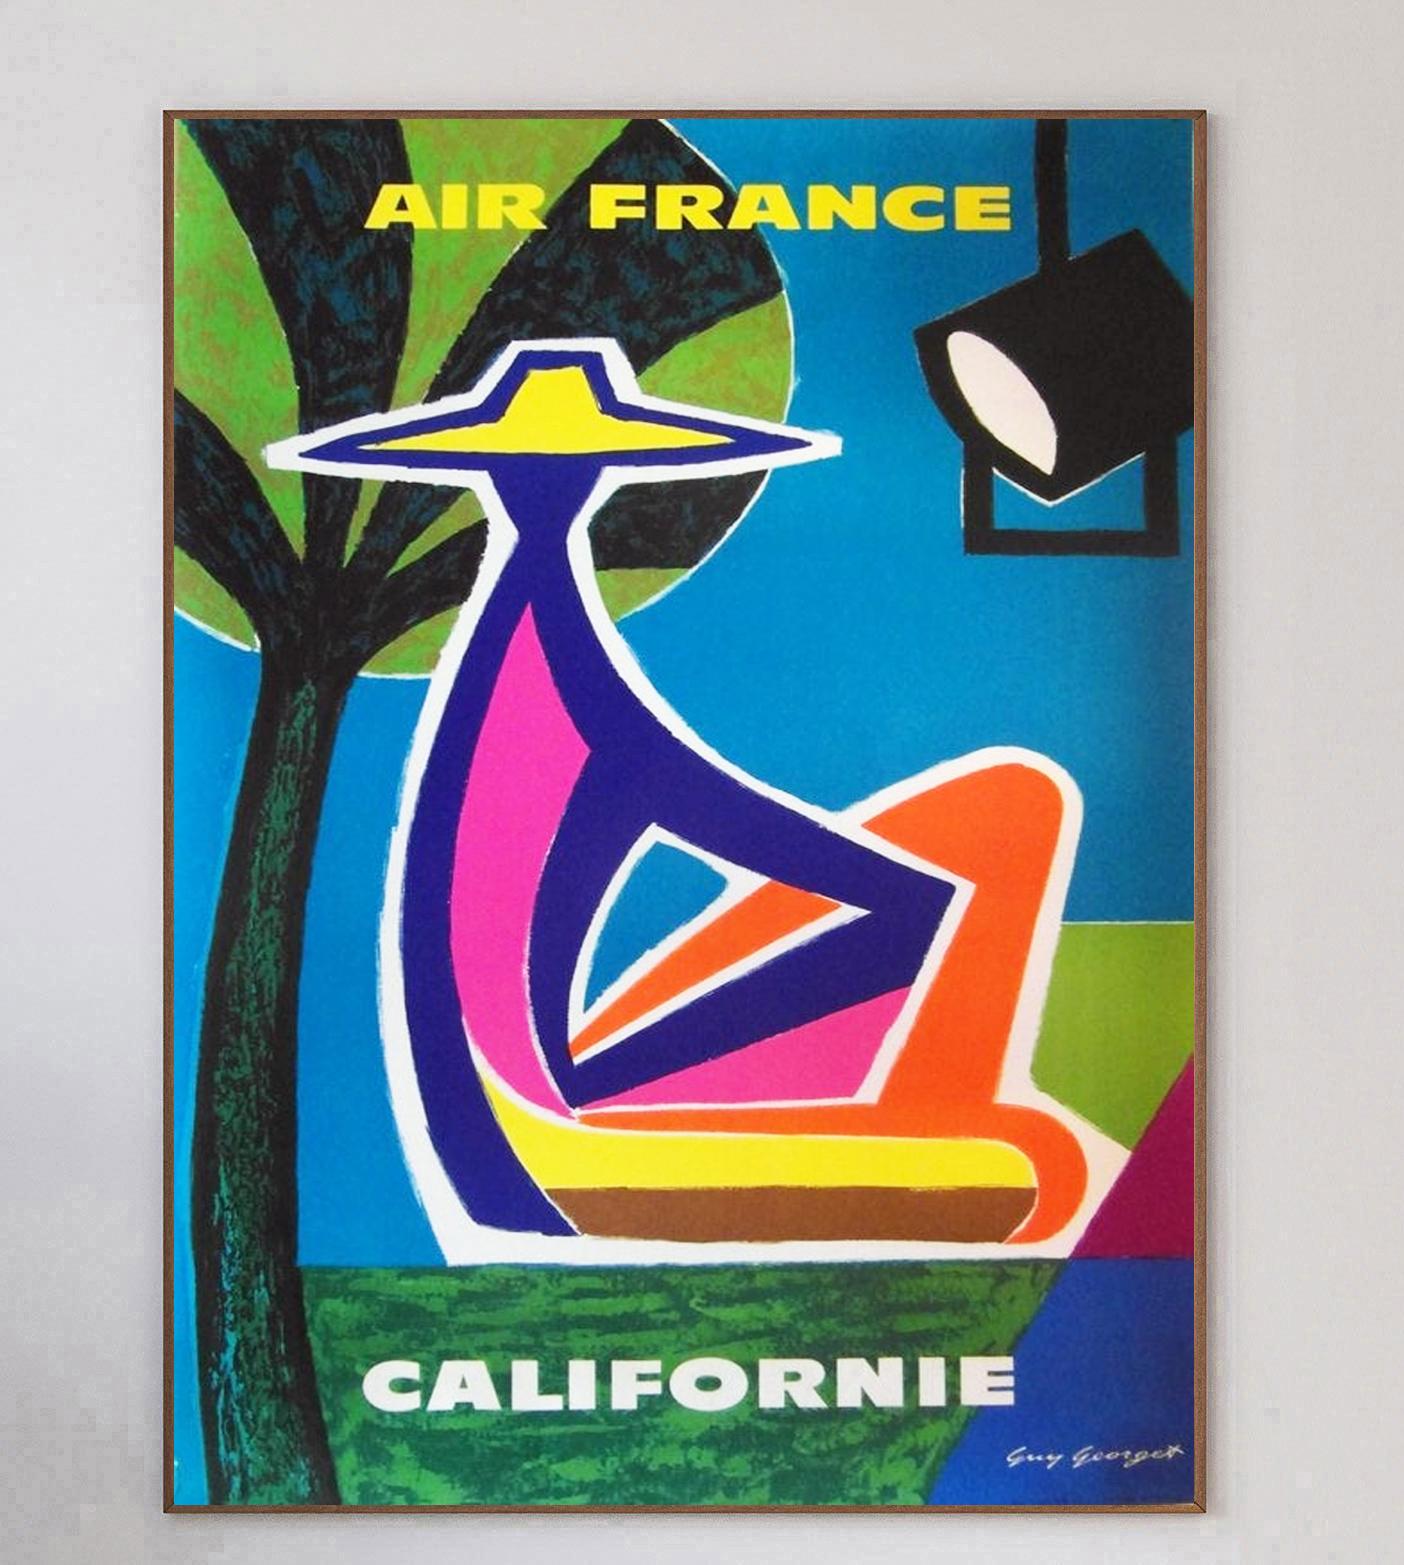 With fabulous artwork from French artist Guy Georget who worked on many Air France posters of the era, this poster promoting the airlines routes to California was created in 1962. Air France was created in 1933 after a merger of multiple French